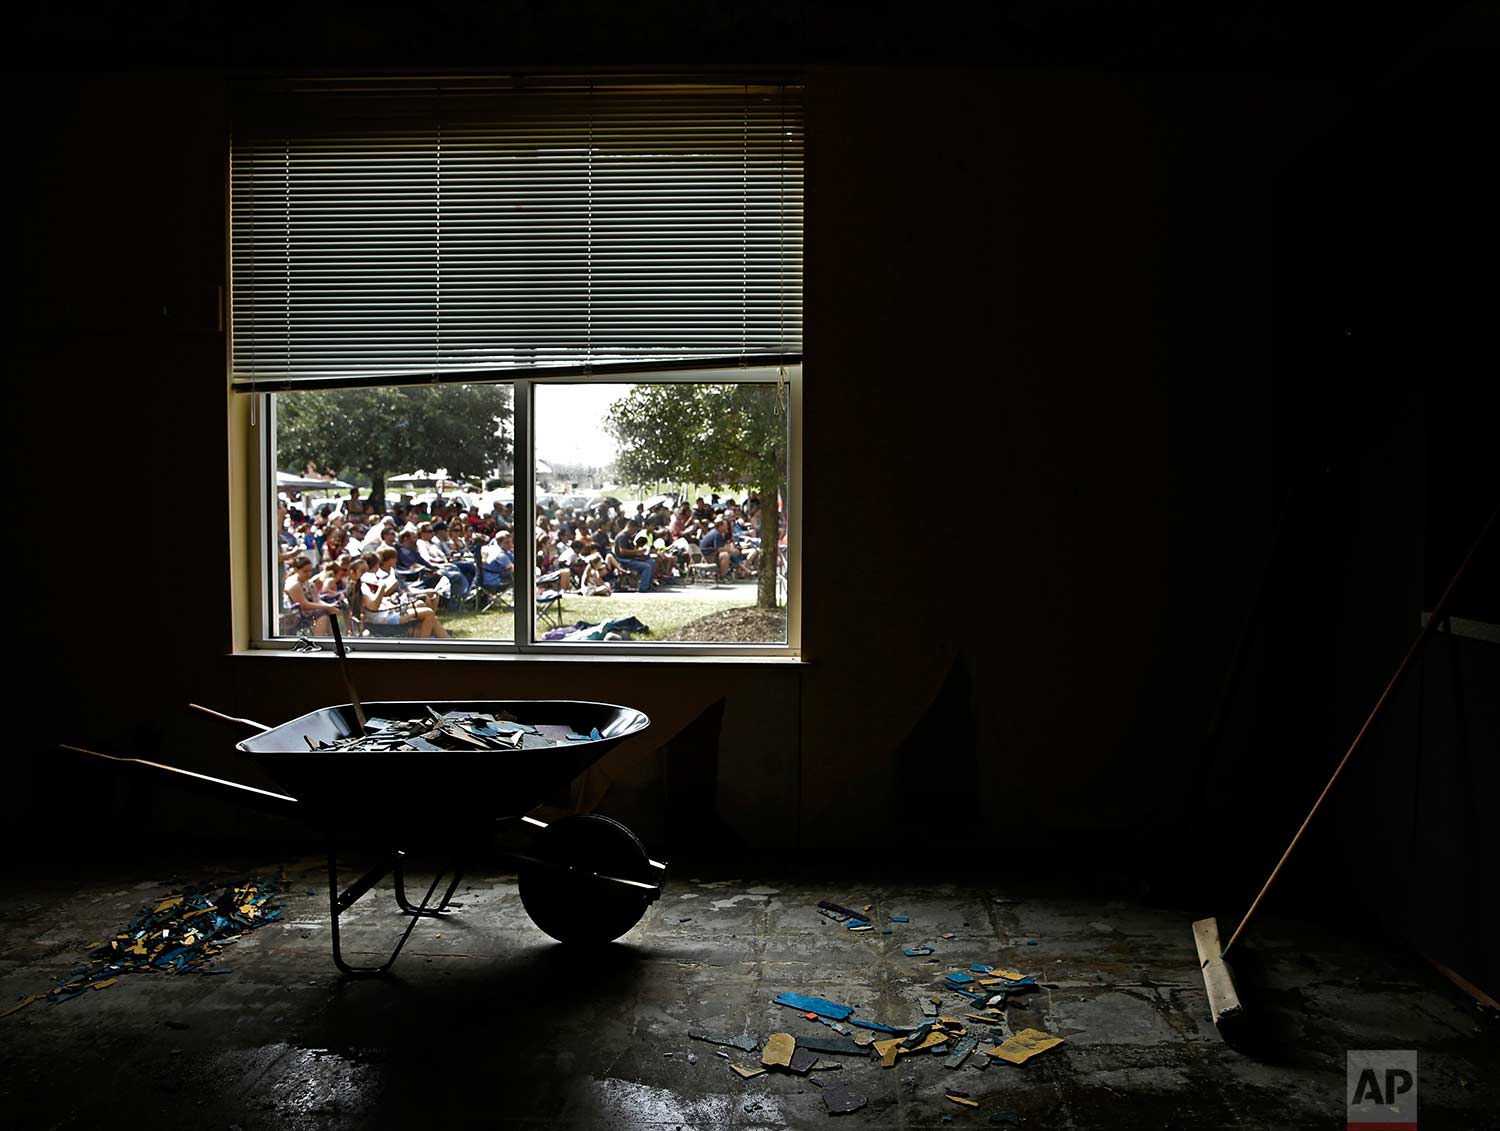  Church members are seen through the window of a water damaged room as they gather in the parking lot of the First Baptist Church for a service Sunday, Sept. 3, 2017, in Humble, Texas. The church building was flooded with two feet of water during Hur